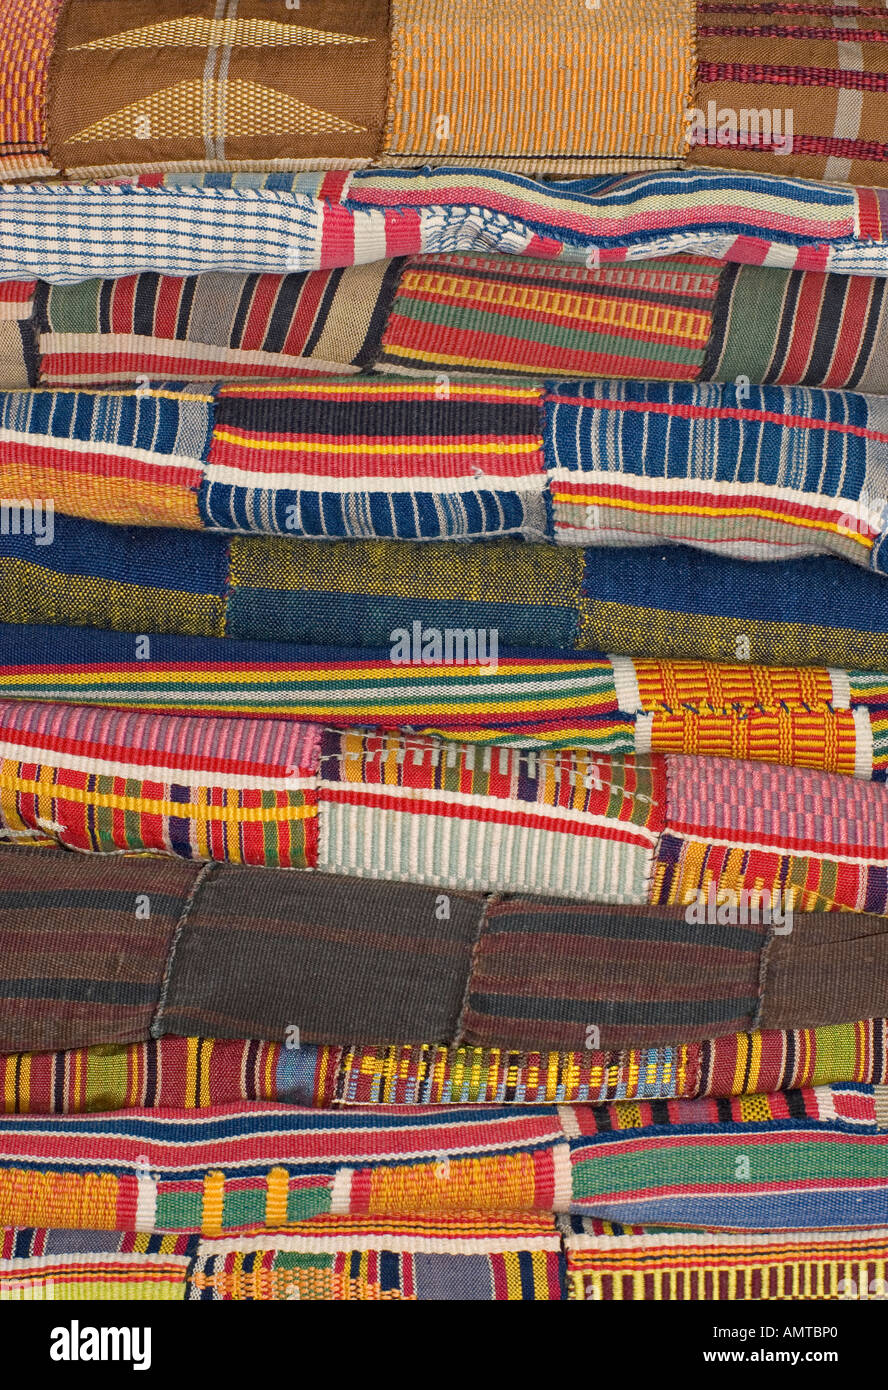 Stack of woven fabrics from the Ewe people of southeast Ghana African textiles Stock Photo